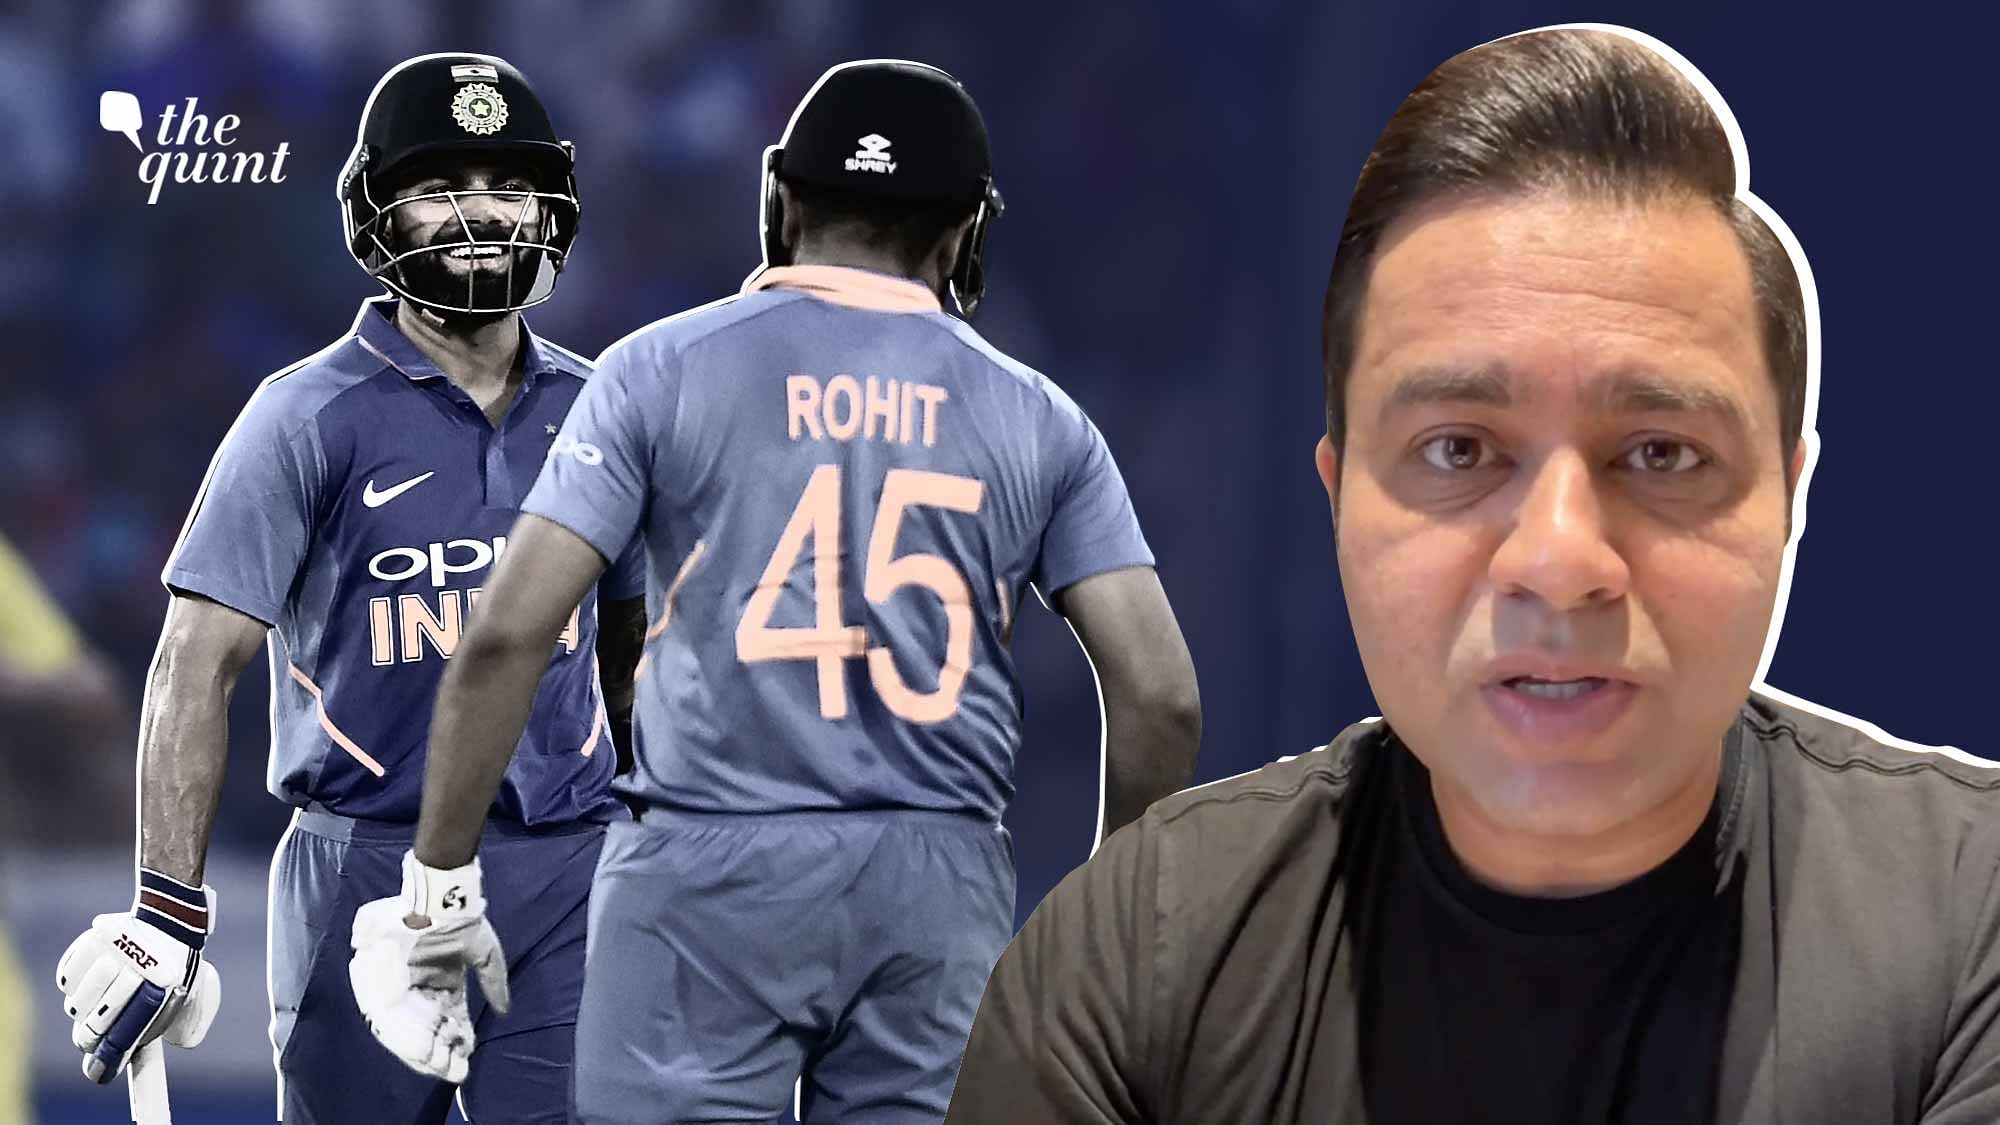 <div class="paragraphs"><p>Aakash Chopra talks about India's two stalwarts' comeback to the T20I squad.</p></div>